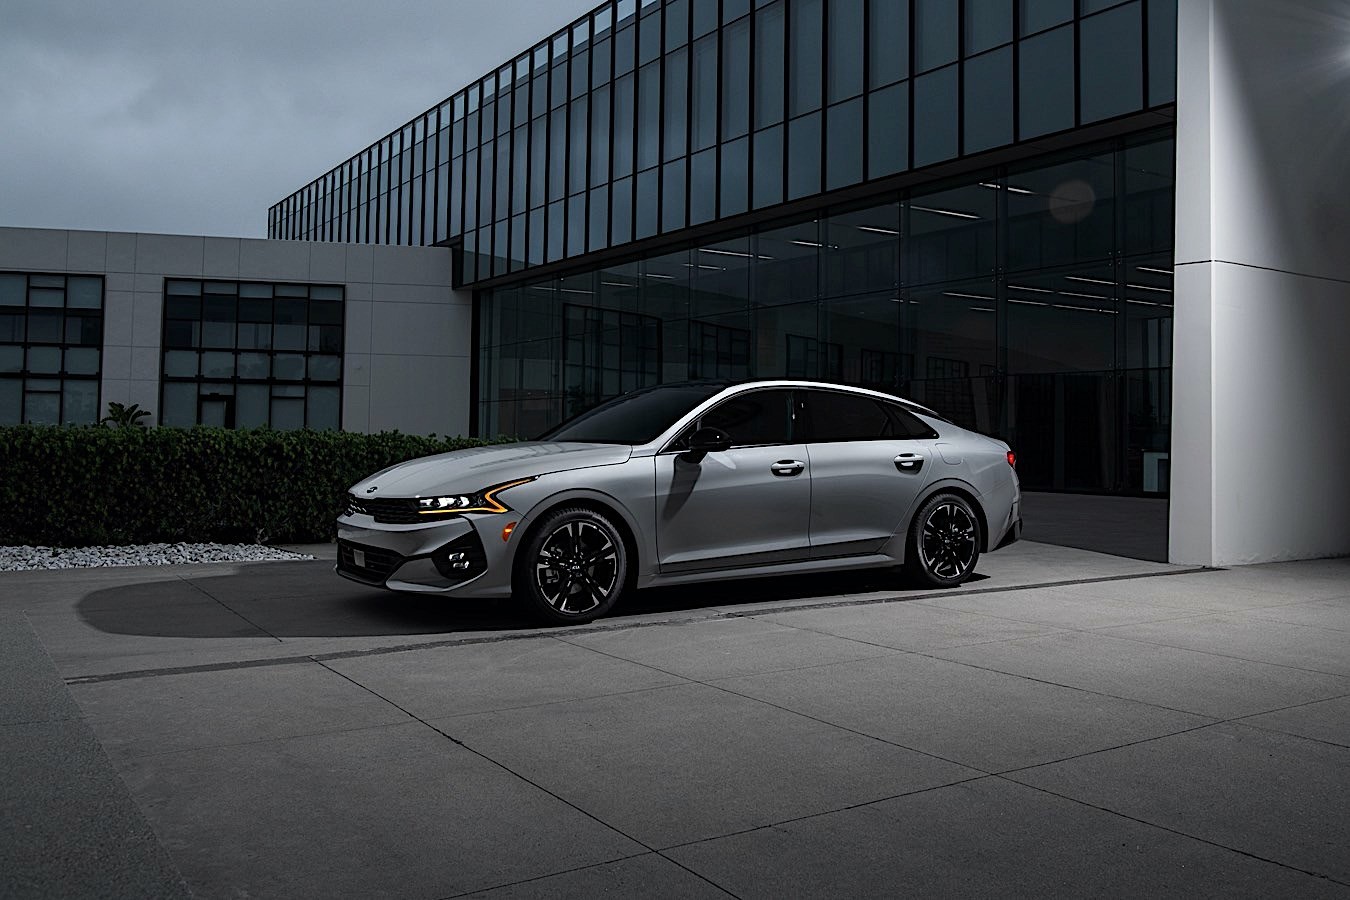 Order Guide Reveals U.S. Pricing for 2021 Kia K5, Comes With Discounts ...